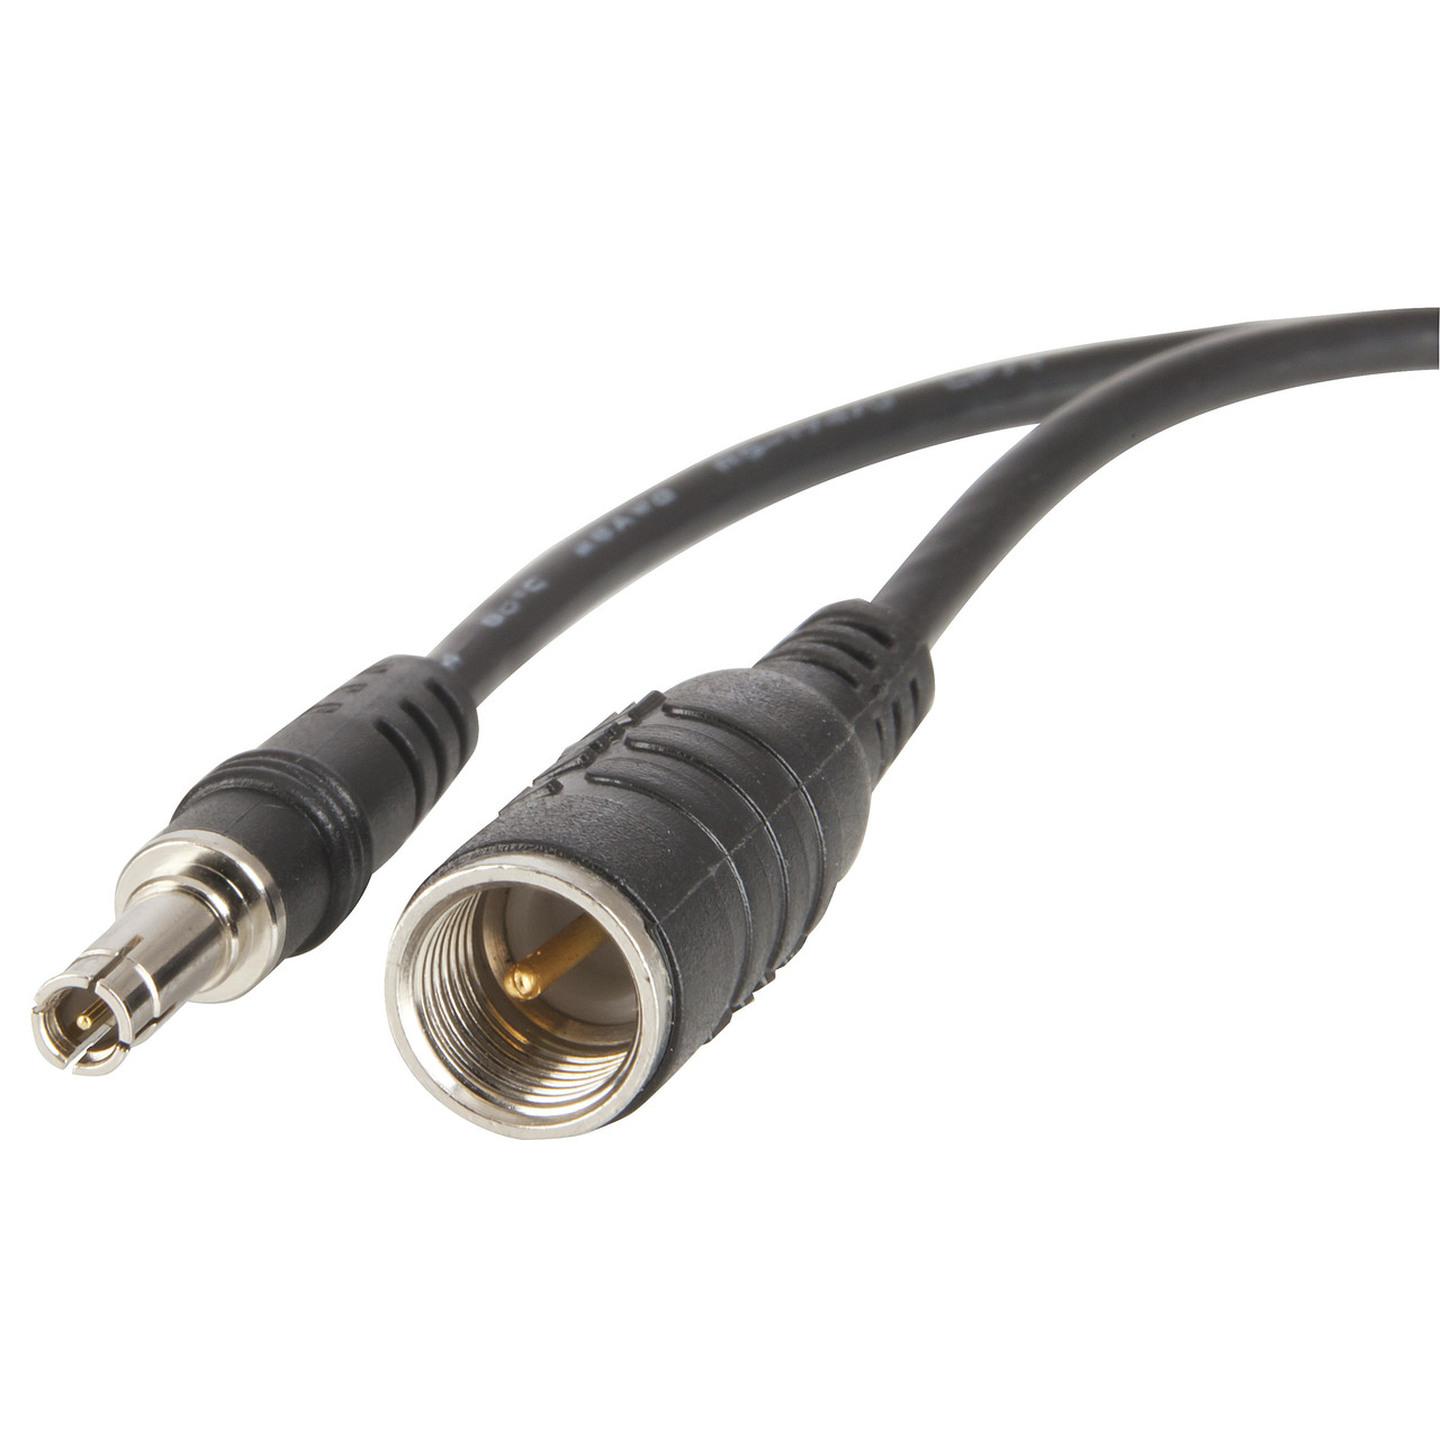 FME to Telstra 4G USB Modem Cable